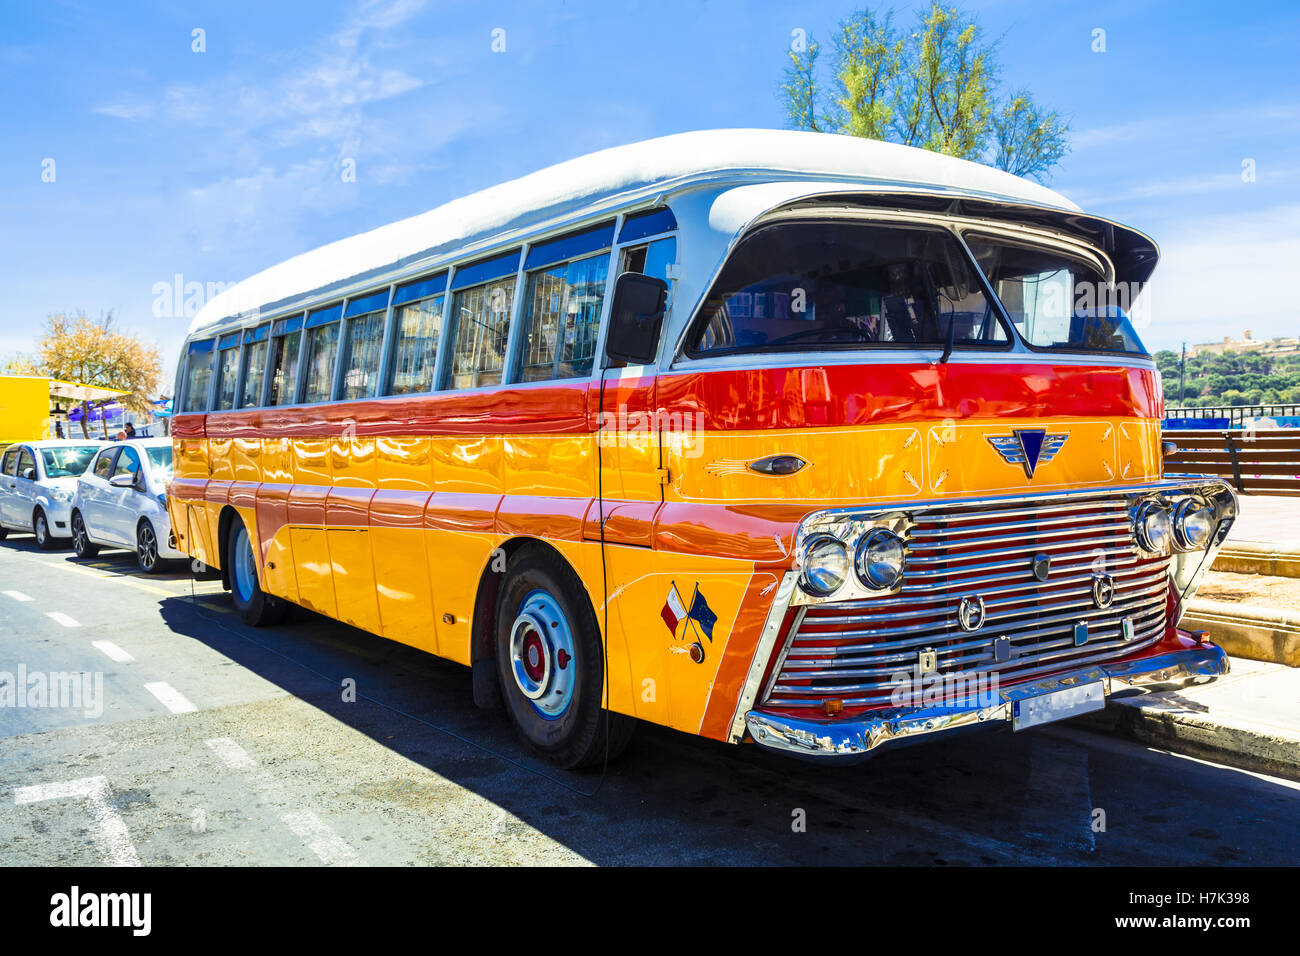 Traditional old bus in Malta island,Europe Stock Photo